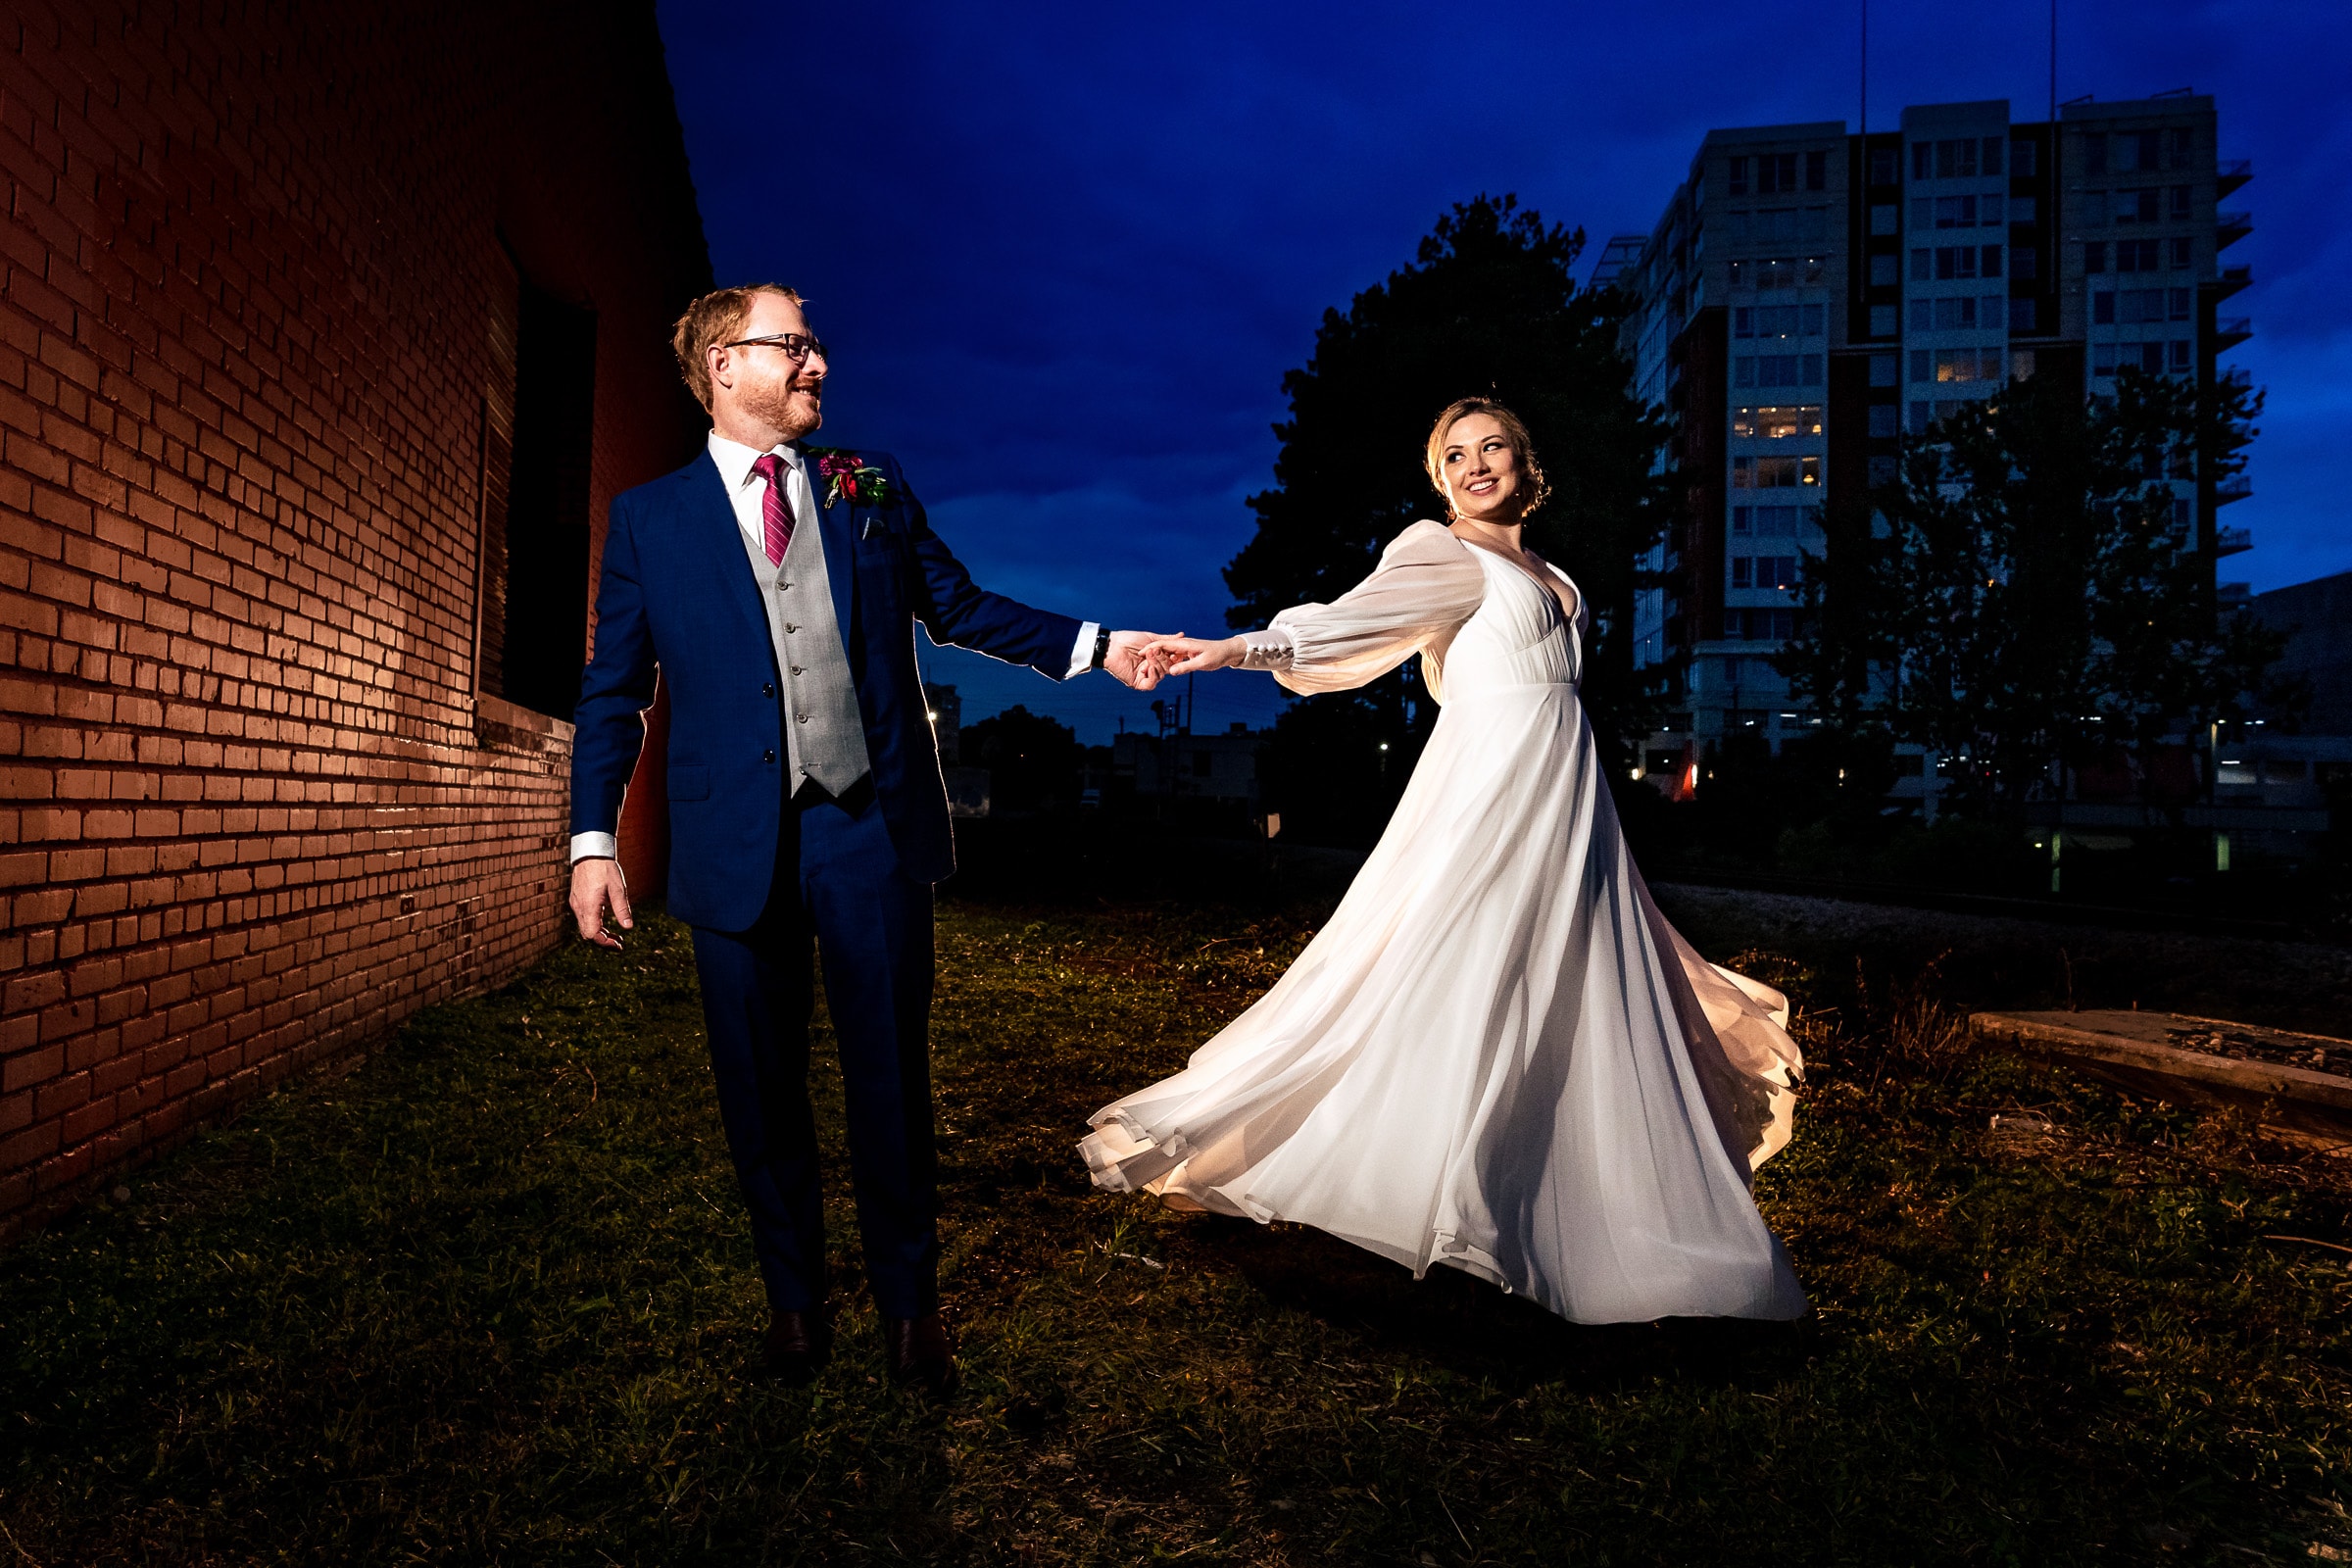 Blue hour portraits for drama in downtown Raleigh | photos by Kivus & Camera